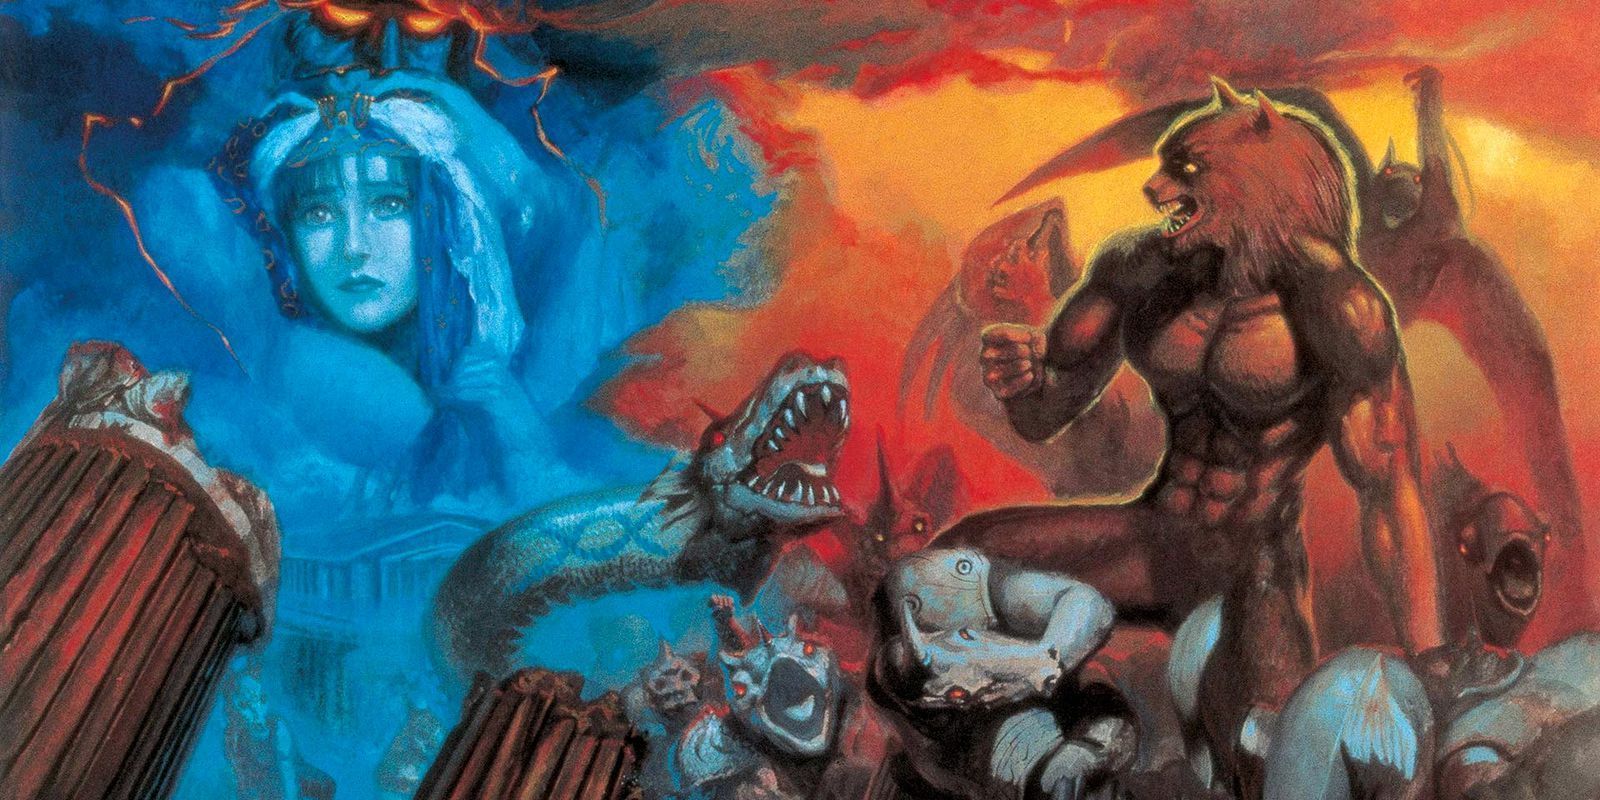 Promotional art for Altered Beast